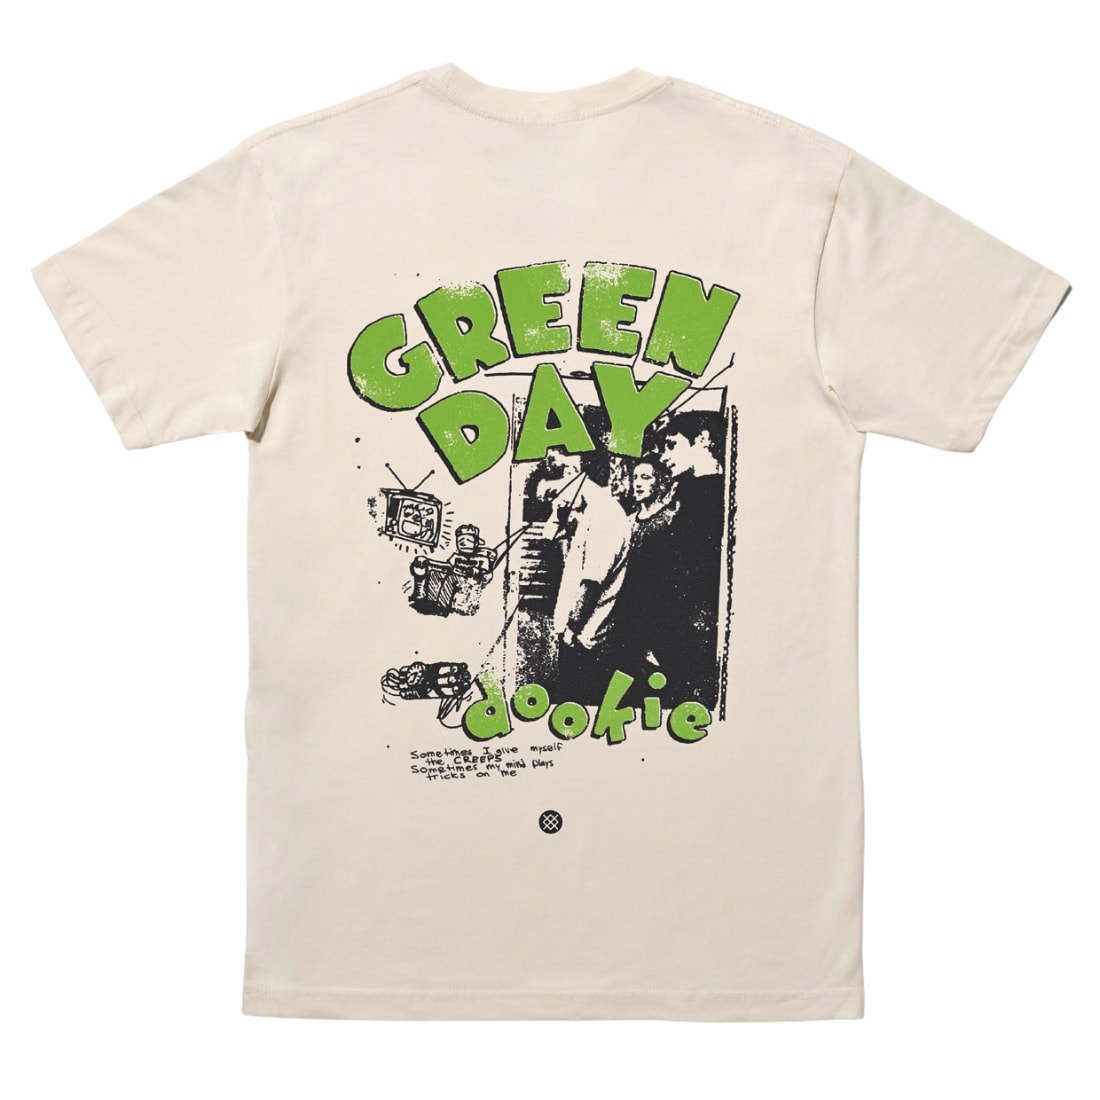 Stance X Greenday 1994 T-Shirt - Vintage White - Mens Graphic T-Shirt by Stance